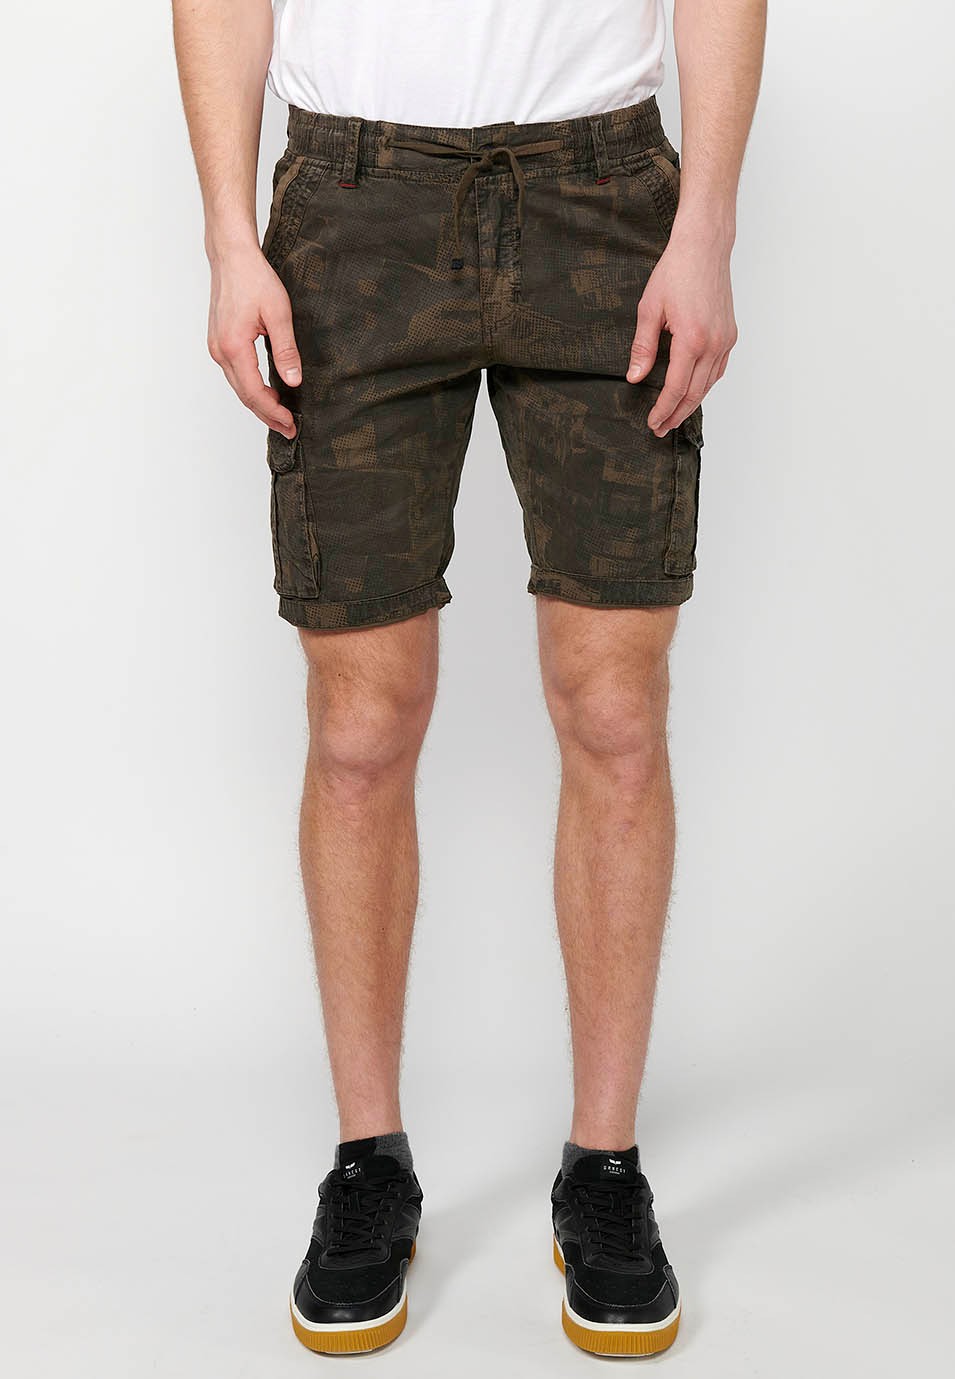 Cargo shorts with front closure with zipper and button and four pockets, two rear pockets with flap with two cargo pockets with flap and adjustable waist with drawstring in Khaki color for men 1